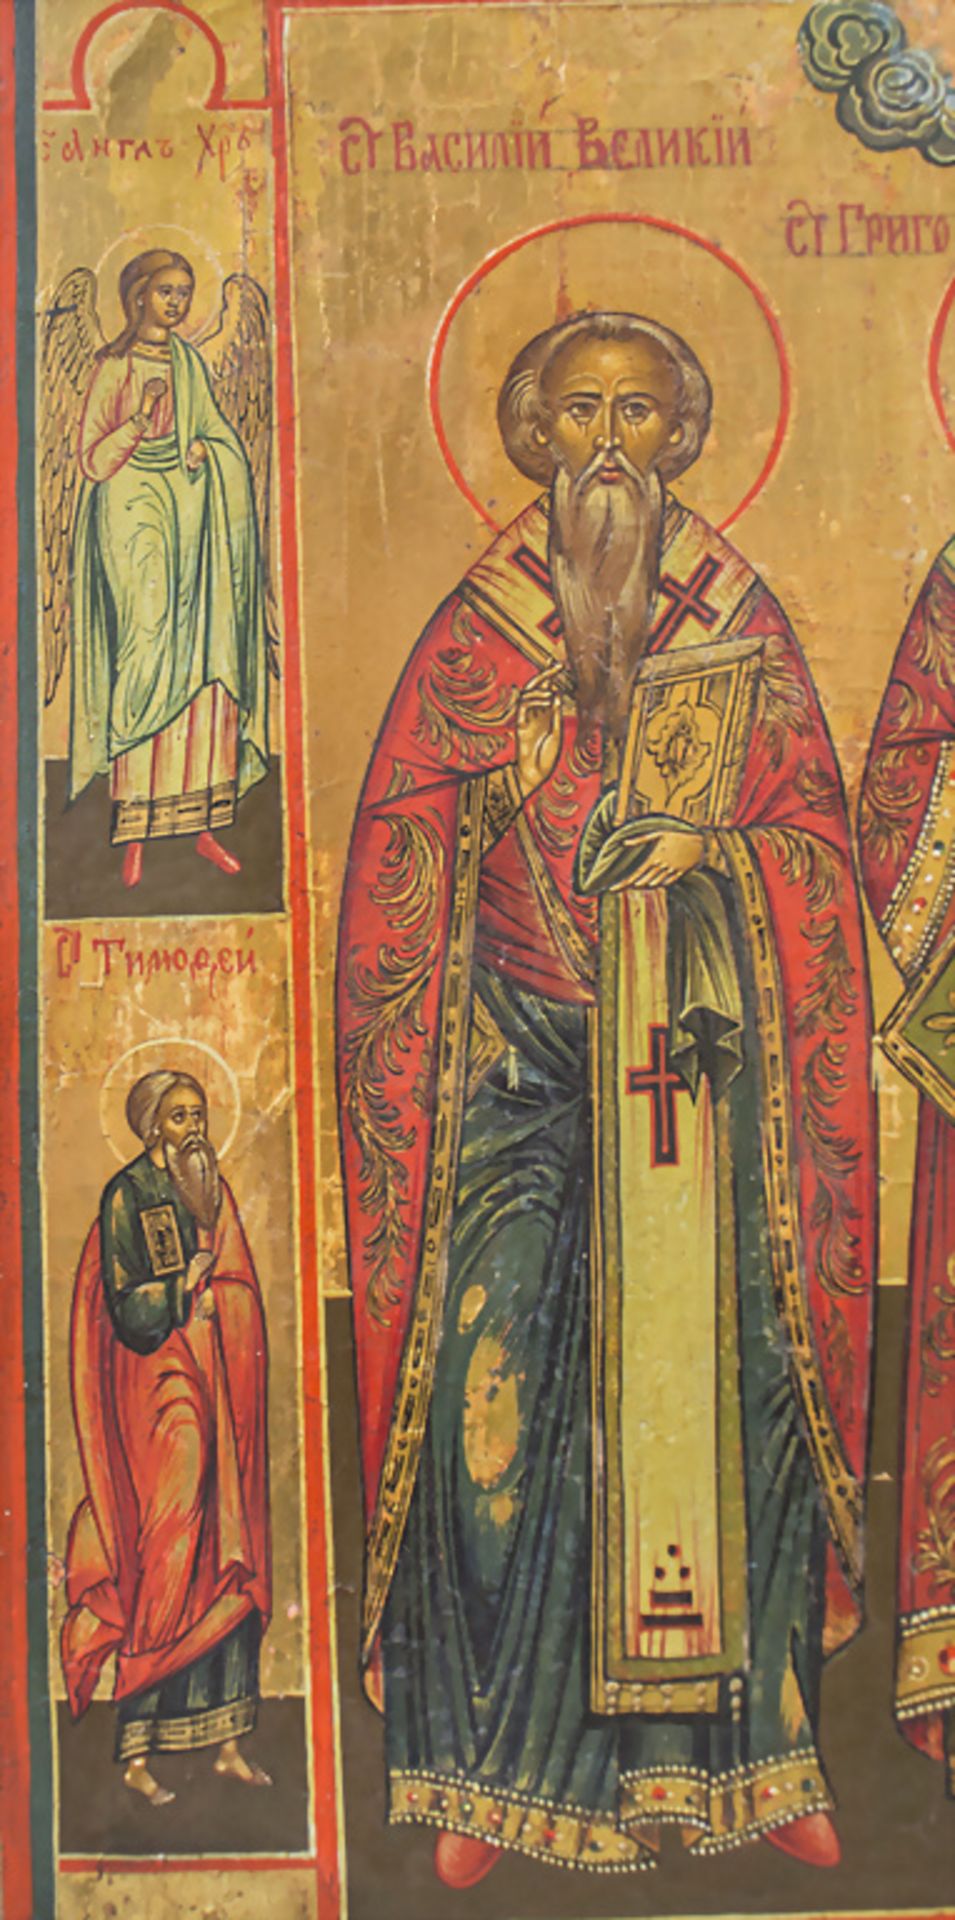 Ikone mit Gottvater und Heiligen / An icon with God Father and Saints, Russland, 19. Jh. - Image 3 of 5